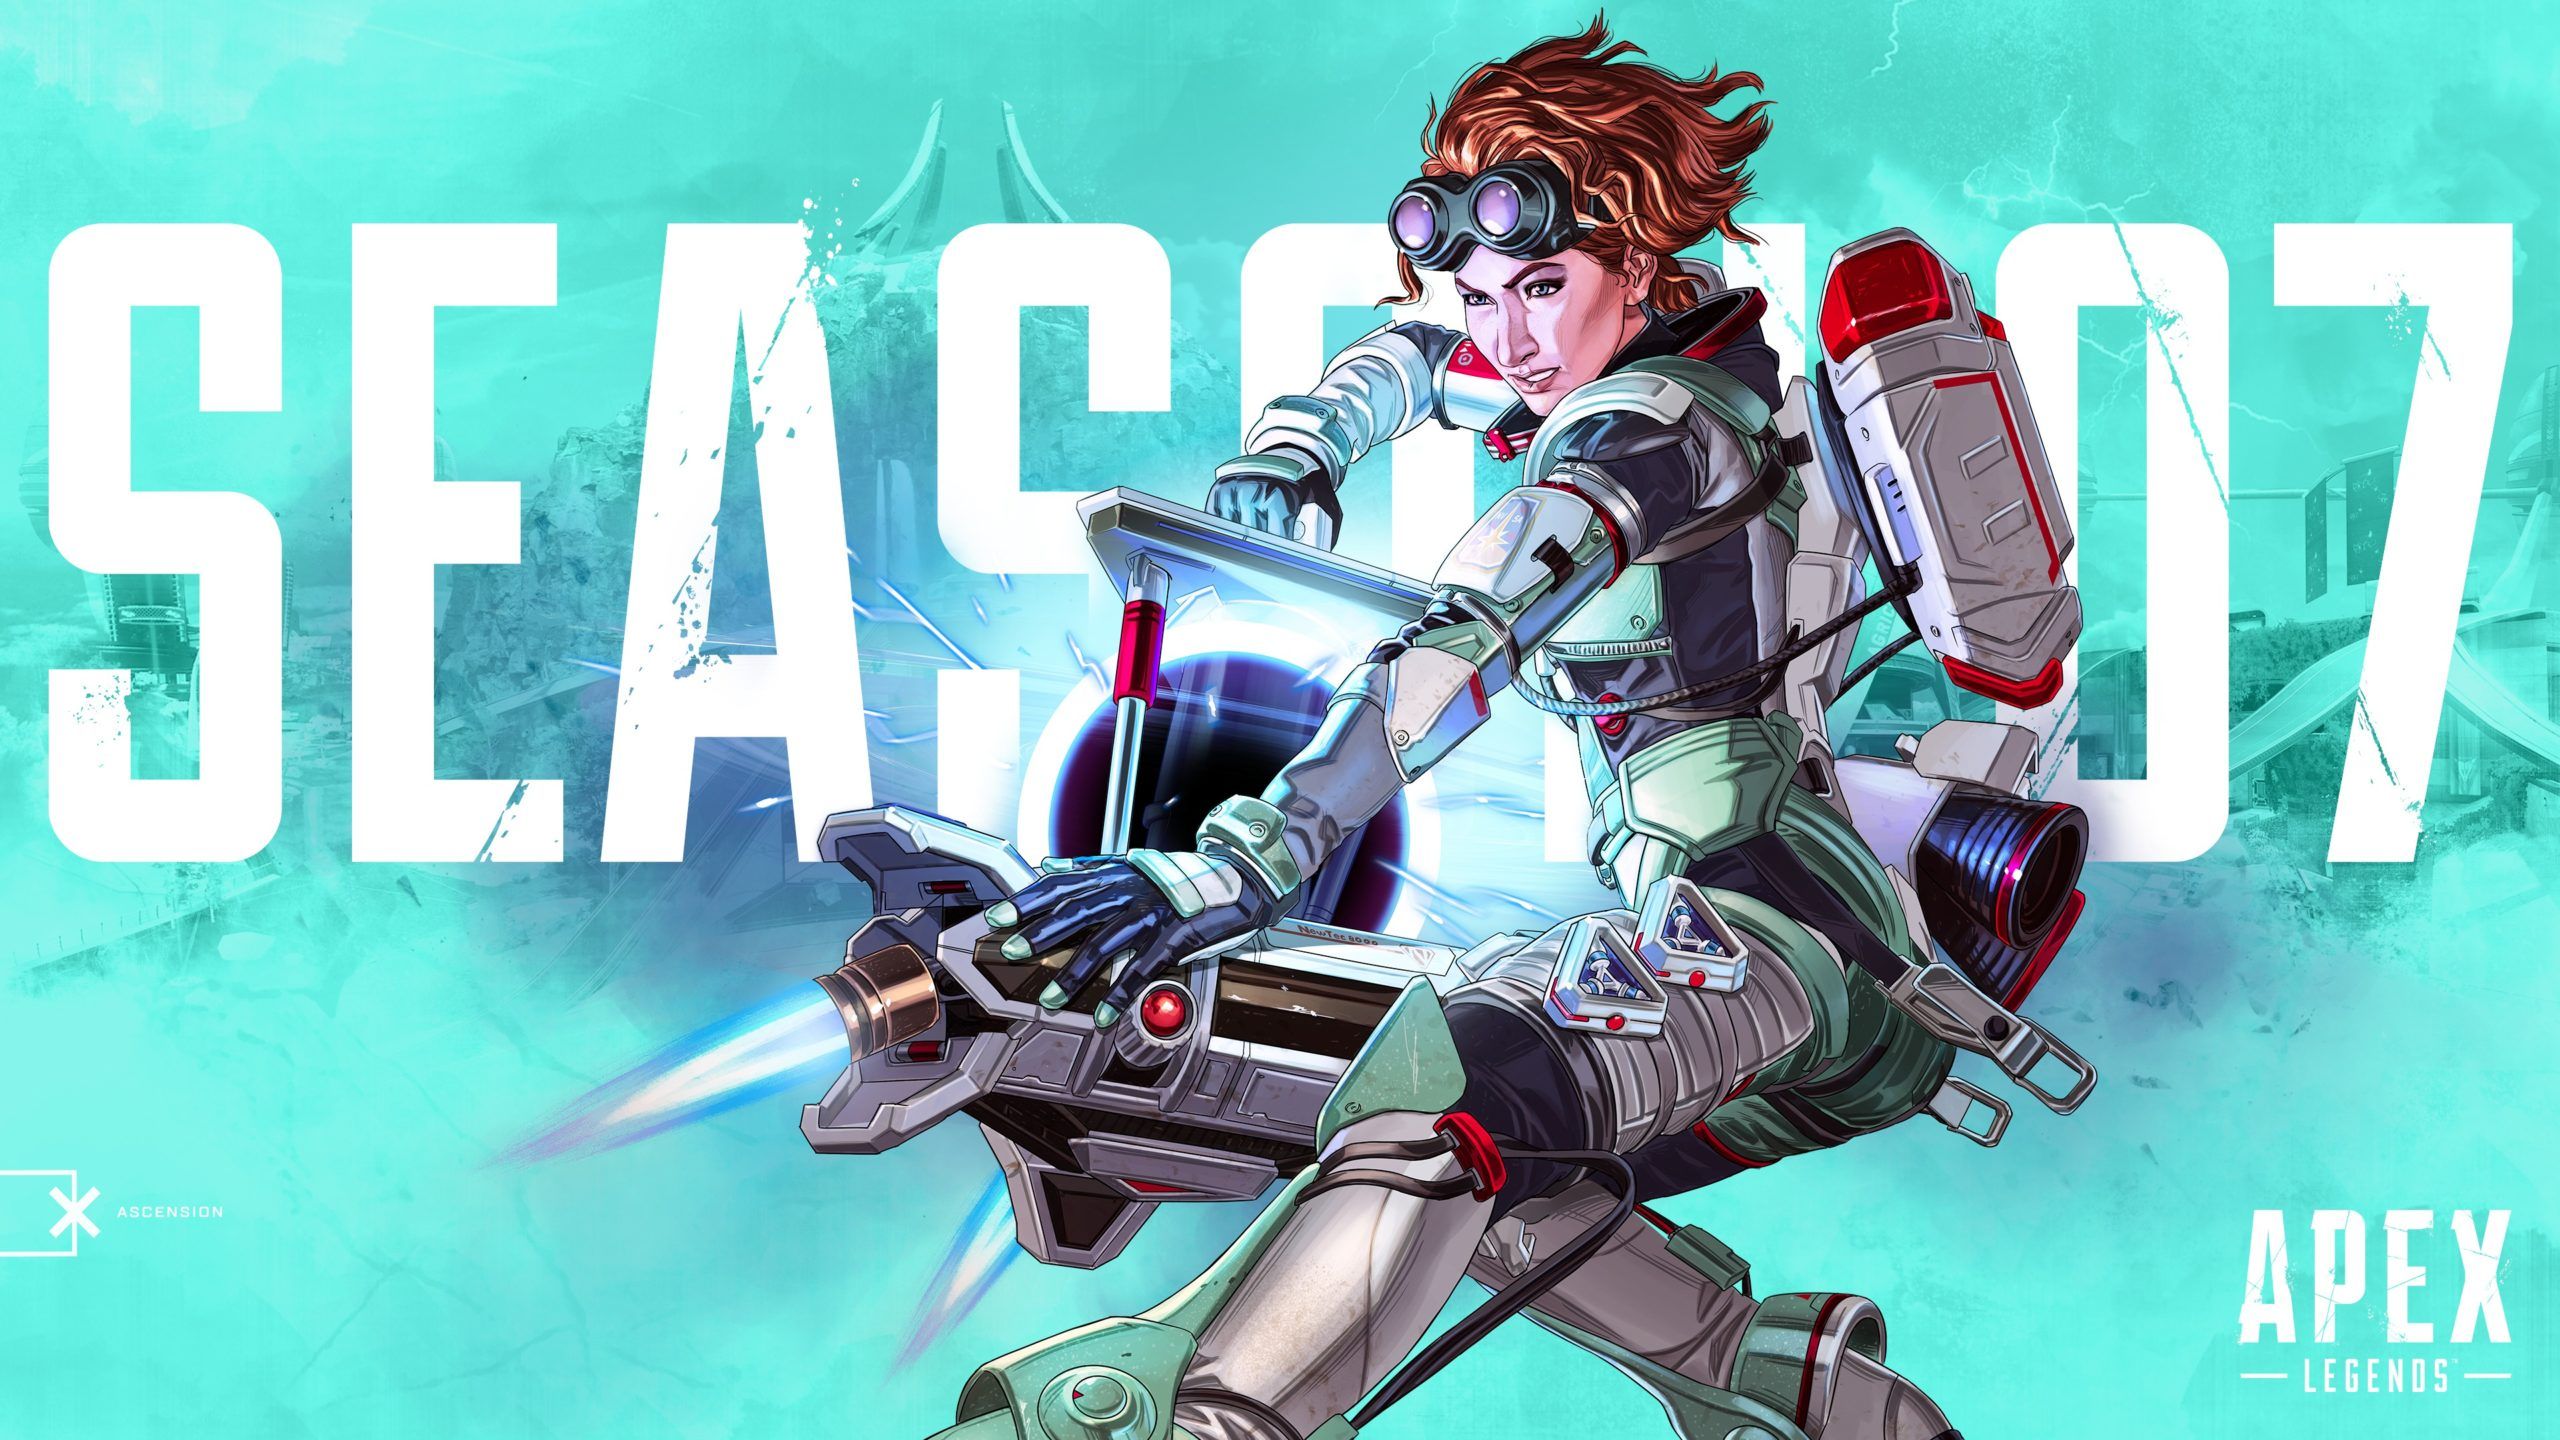 Apex Legends reveals first Season 7 details including a new hero and map